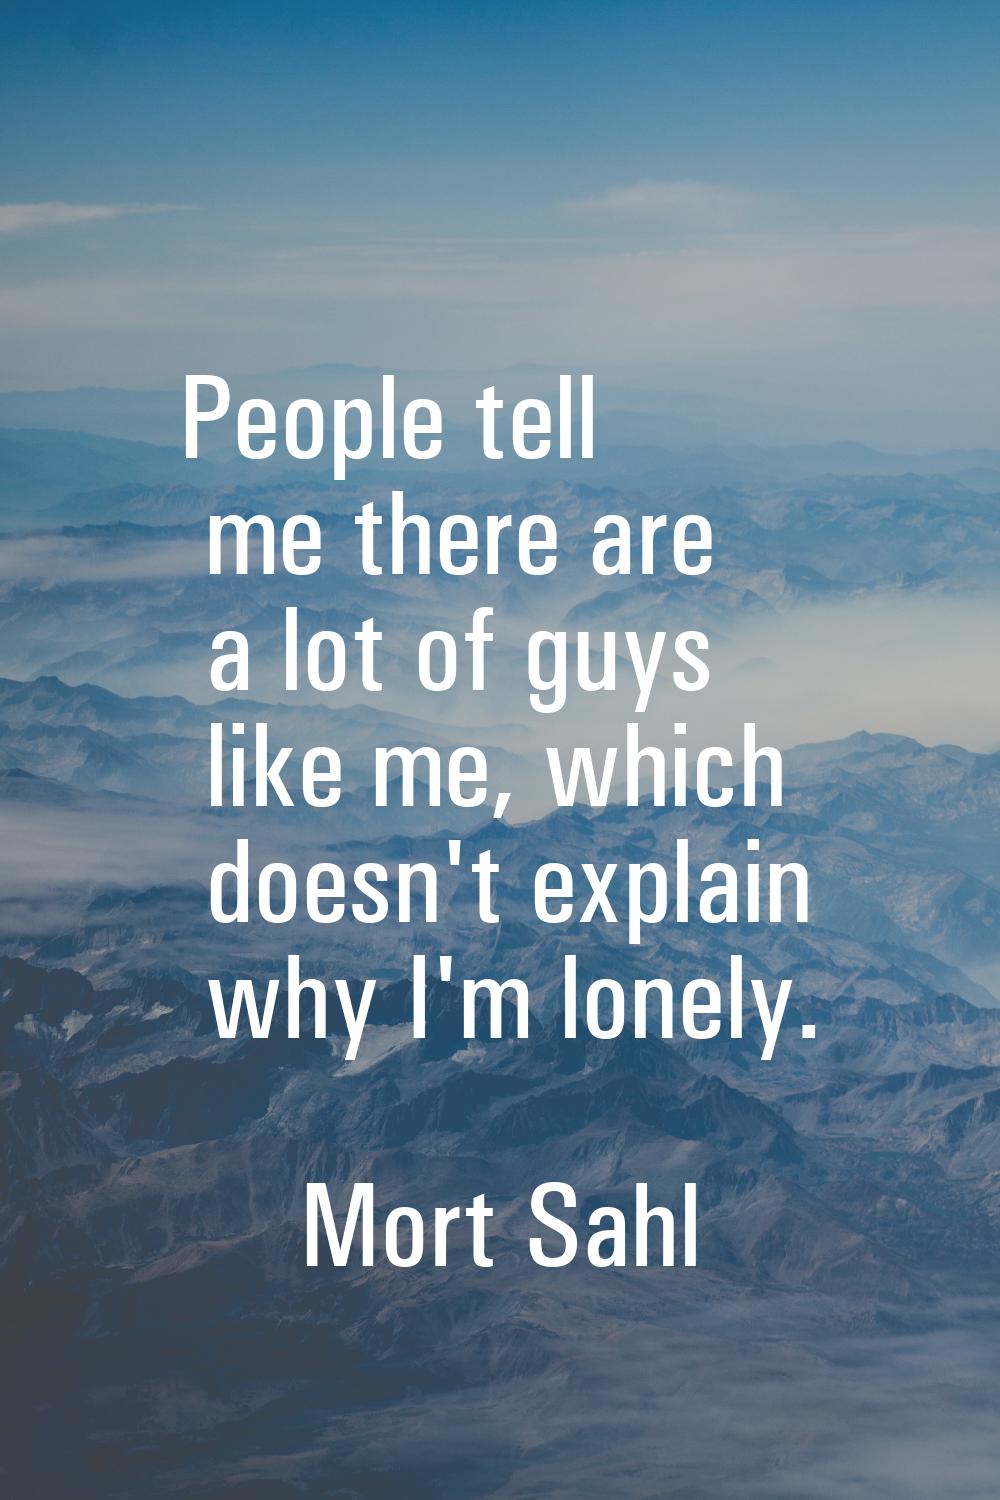 People tell me there are a lot of guys like me, which doesn't explain why I'm lonely.